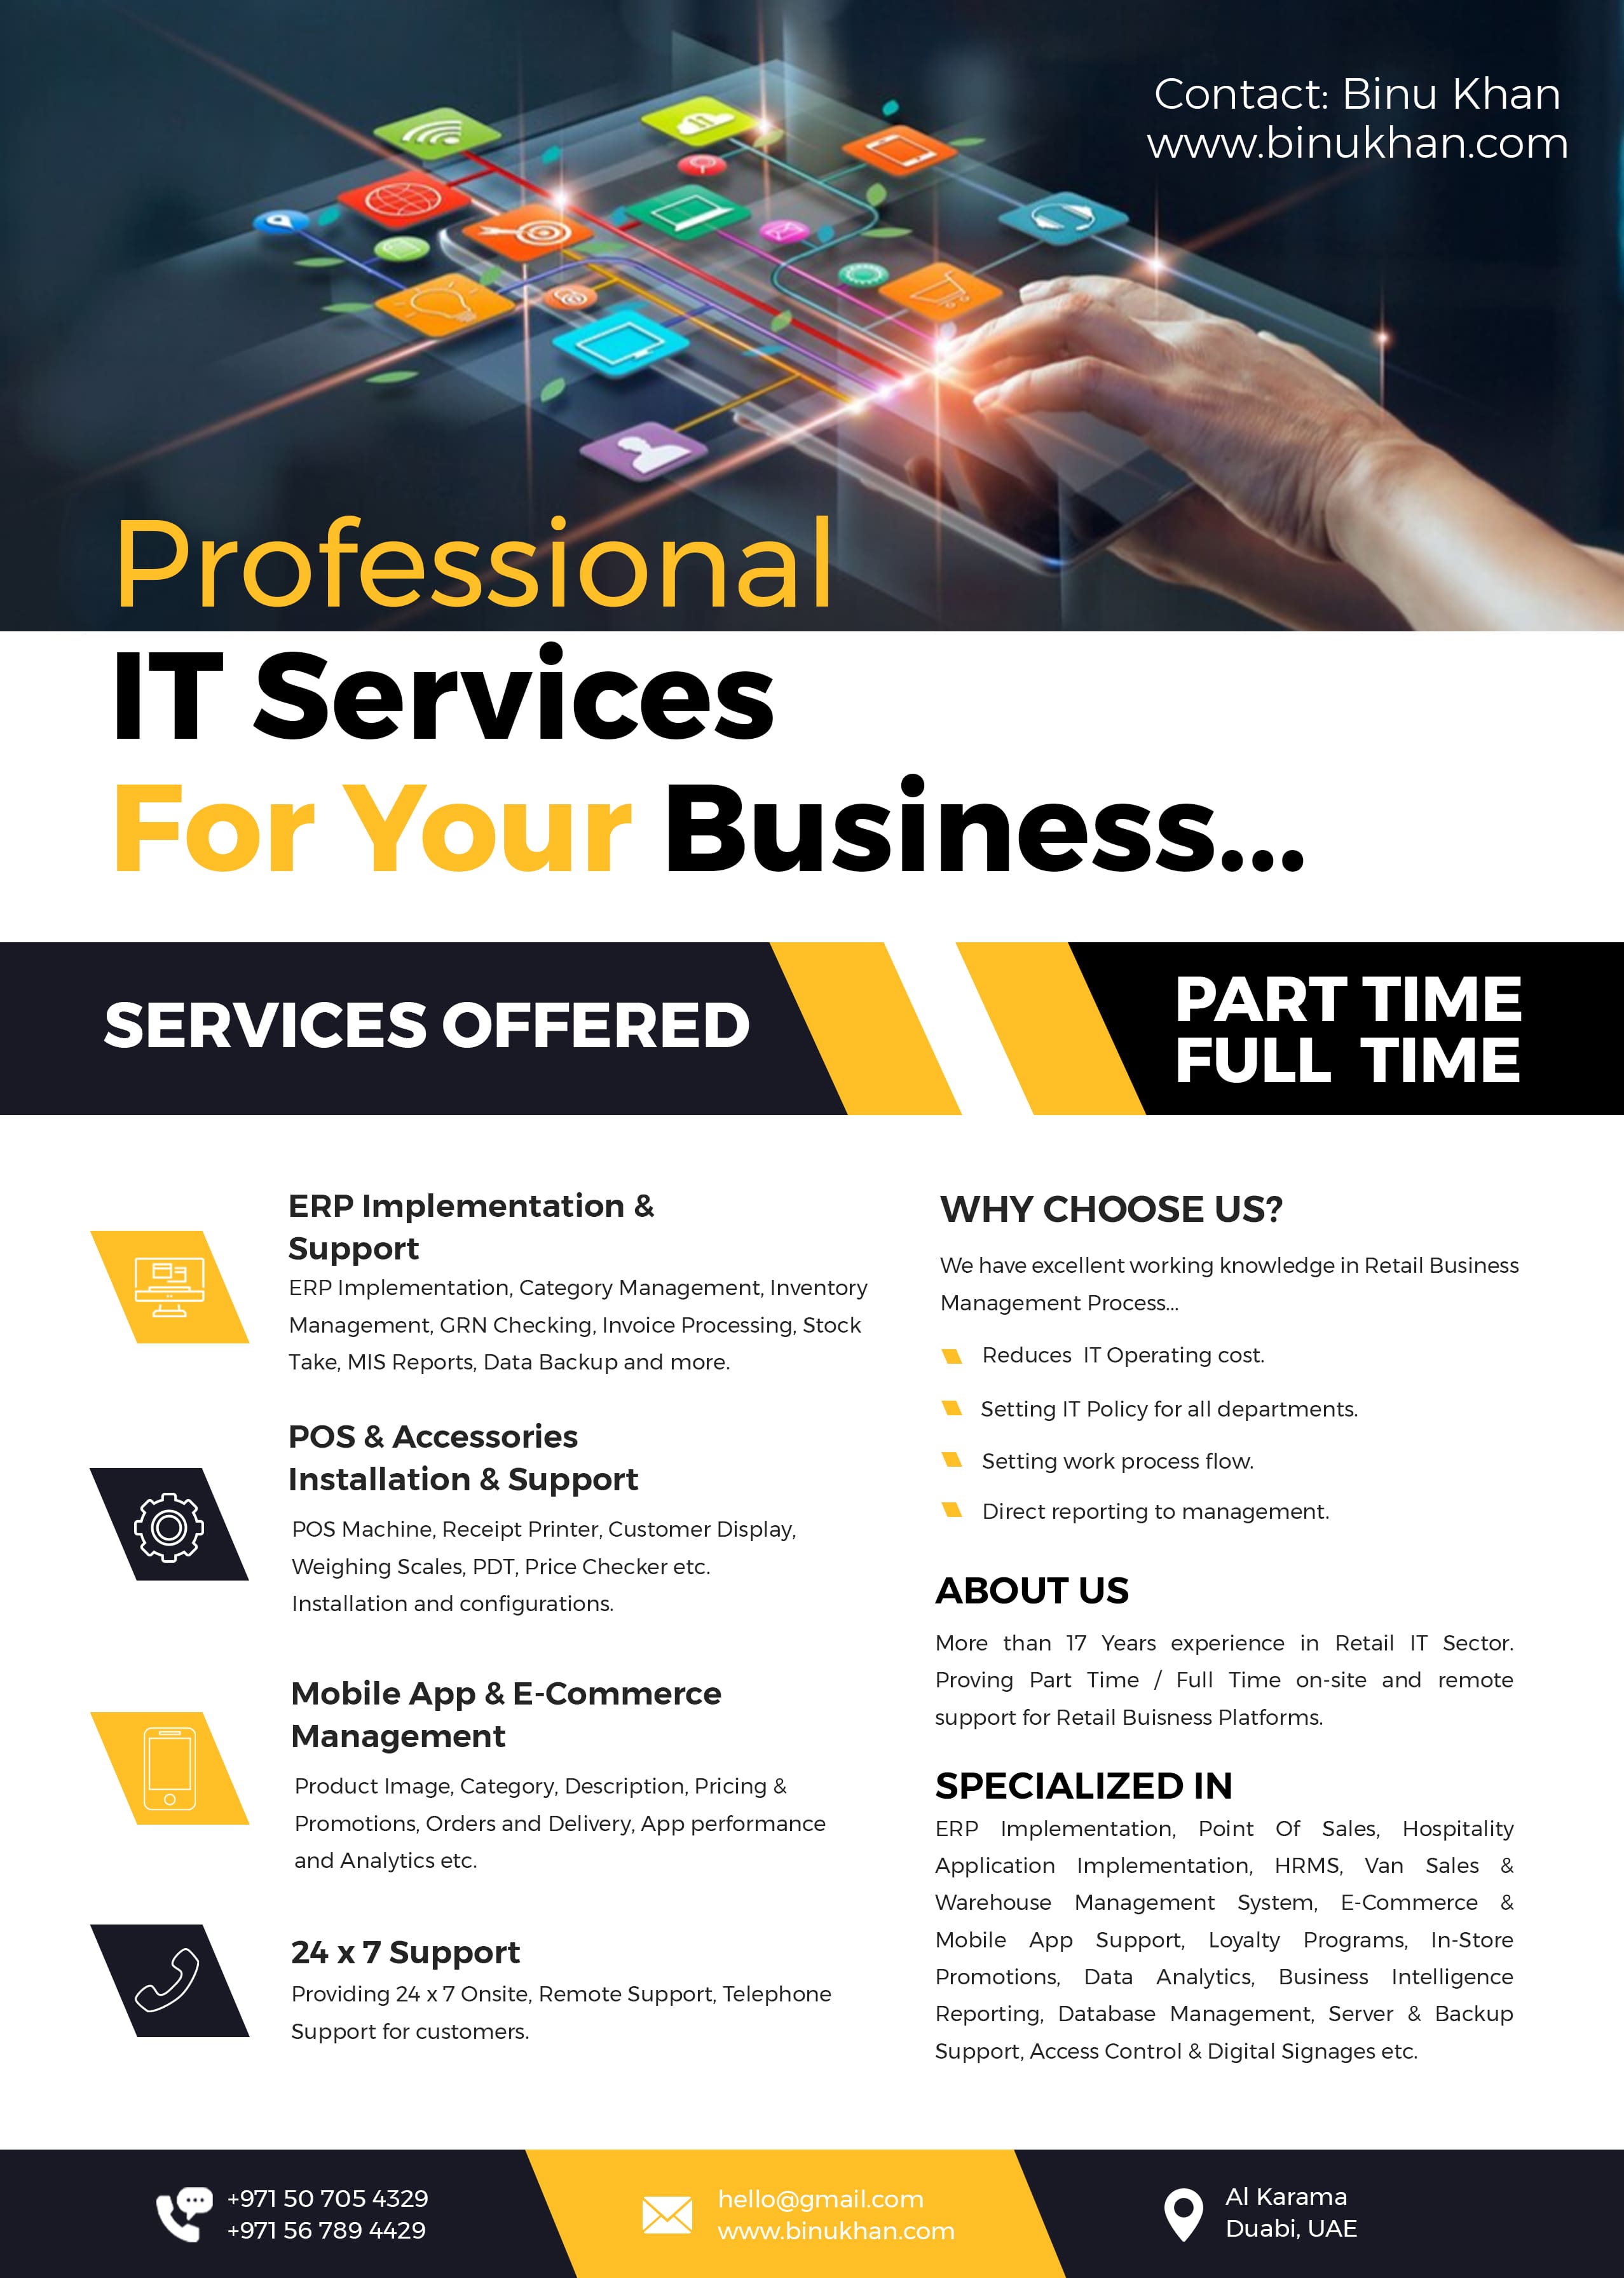 Contact: Binu Khan
www.binukhan.com

DS

Professional
IT Services
Business...

 

   

    

SU p11

SERVICES OFFERED FULL TIME

ERP Implementation & WHY CHOOSE US?
Support

We have excellent working knowledge in Retail Business
ERP Implementation, Category Management, Inventory

Management Process...
Management, GRN Checking, Invoice Processing, Stock

Take, MIS Reports, Data Backup and more. Reduces IT Operating cost.

Setting IT Policy for all departments.
POS & Accessories

Installation & Support

. ) ) . Direct reporting to management.
@) POS Machine, Receipt Printer, Customer Display,

Weighing Scales, PDT, Price Checker etc.

Installation and configurations. ABOUT Us

More than 17 Years experience in Retail IT Sector.

Setting work process flow.

Proving Part Time / Full Time on-site and remote

Mobile App & E-Commerce

support for Retail Buisness Platforms.

Management

Product Image, Category, Description, Pricing & SPECIALIZED IN

Promotions, Orders and Delivery, App performance ERP Implementation, Point Of Sales, Hospitality

and Analytics etc. Application Implementation, HRMS, Van Sales &
Warehouse Management System, E-Commerce &
Mobile A S ort, Loyalty Programs, In-Store

24 x 7 Support Pp Supp yaly reg

Co . Promotions, Data Analytics, Business Intelligence
Providing 24 x 7 Onsite, Remote Support, Telephone

Reporting, Database Management, Server & Backup

 

Support for customers.
Support, Access Control & Digital Signages etc.

+971 56 789 4429

Ag +971 50 705 4329

Al Karama
Duabi, UAE